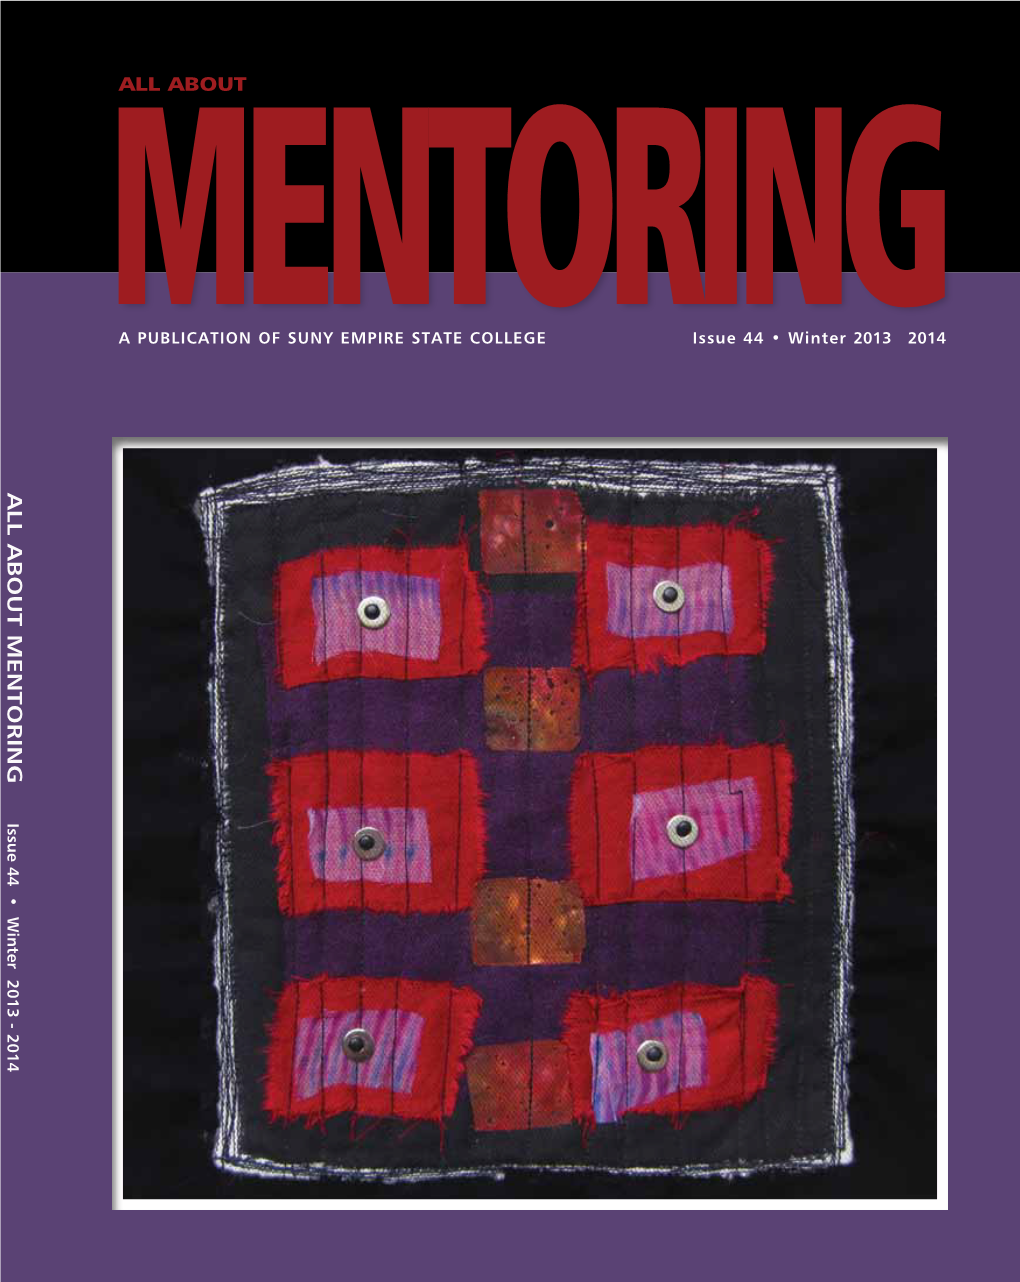 All About Mentoring